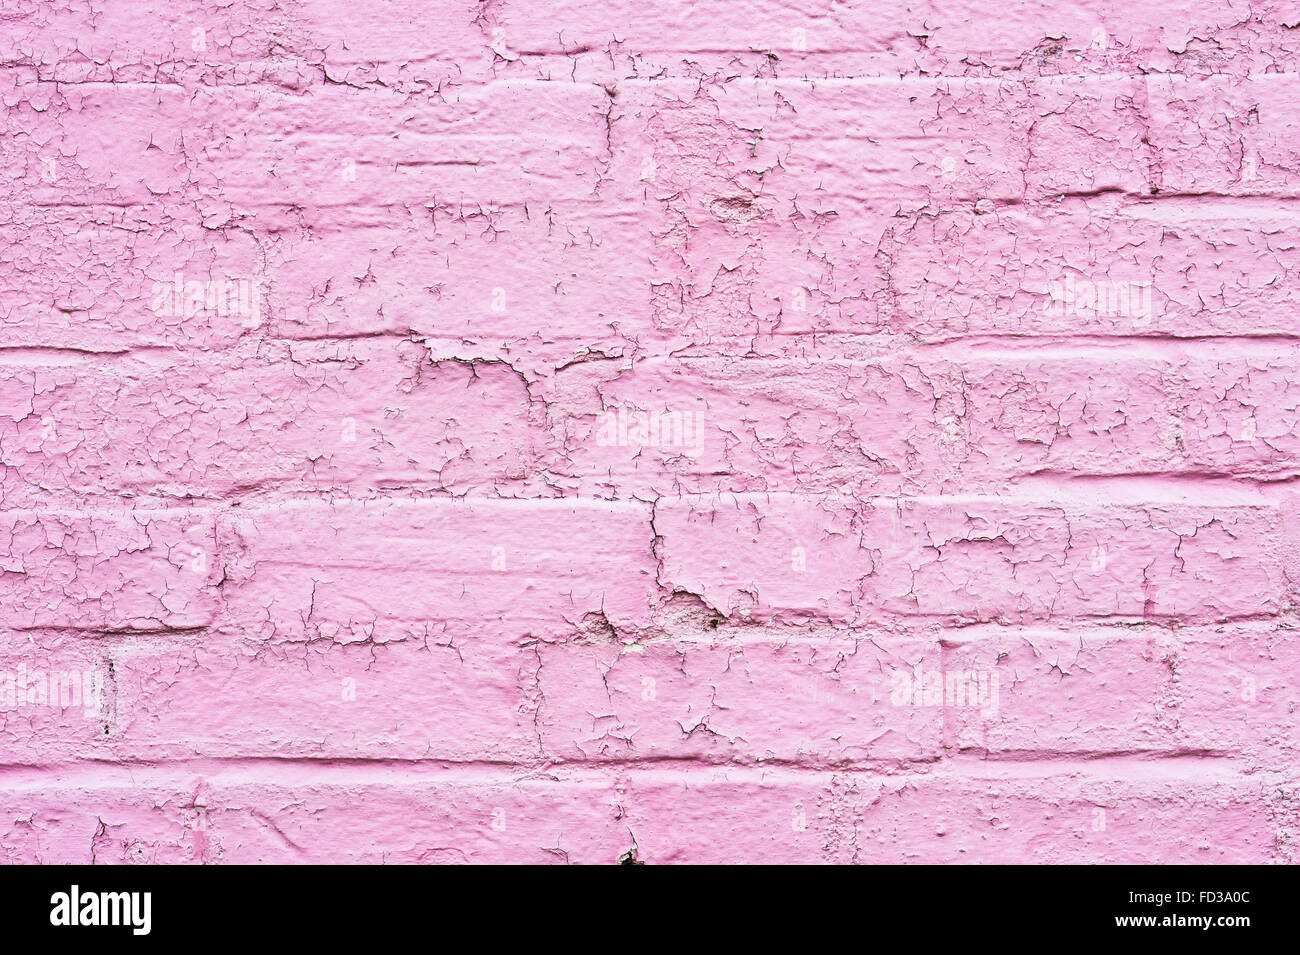 Peeling pink paint on a brick wall, as a background Stock Photo